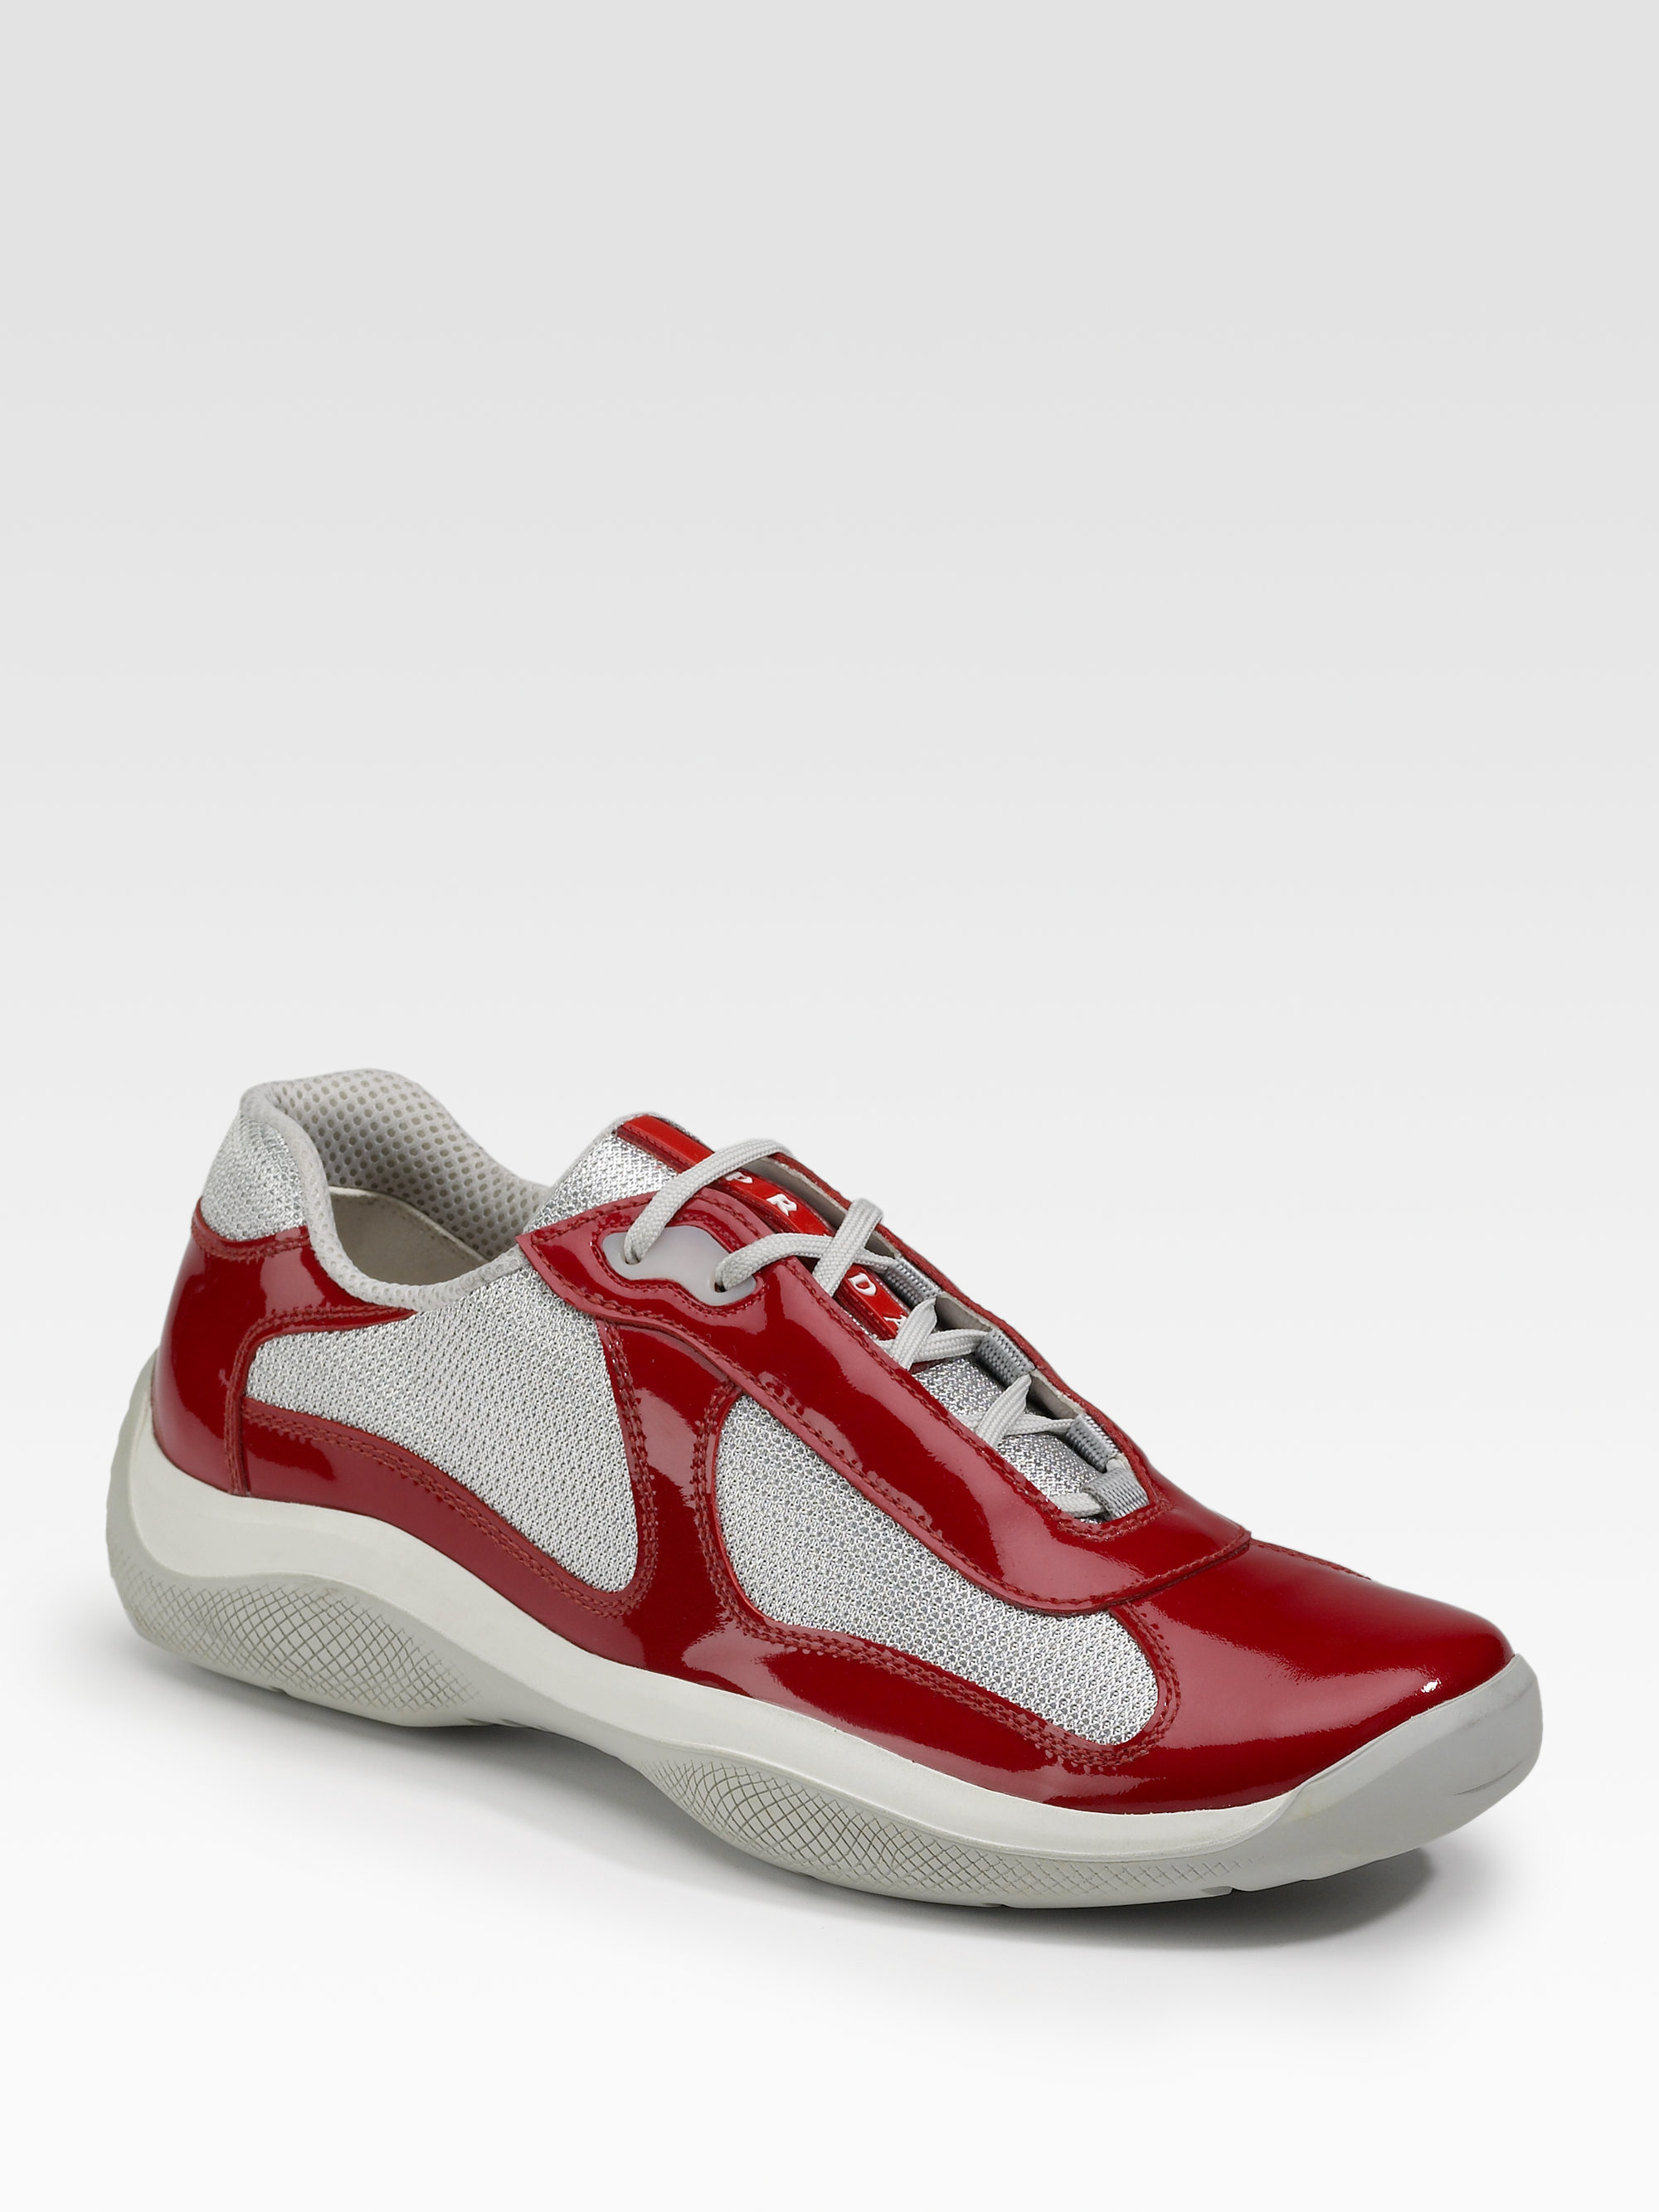 Prada Patent Sneakers in Cherry Red (Red) for Men - Lyst